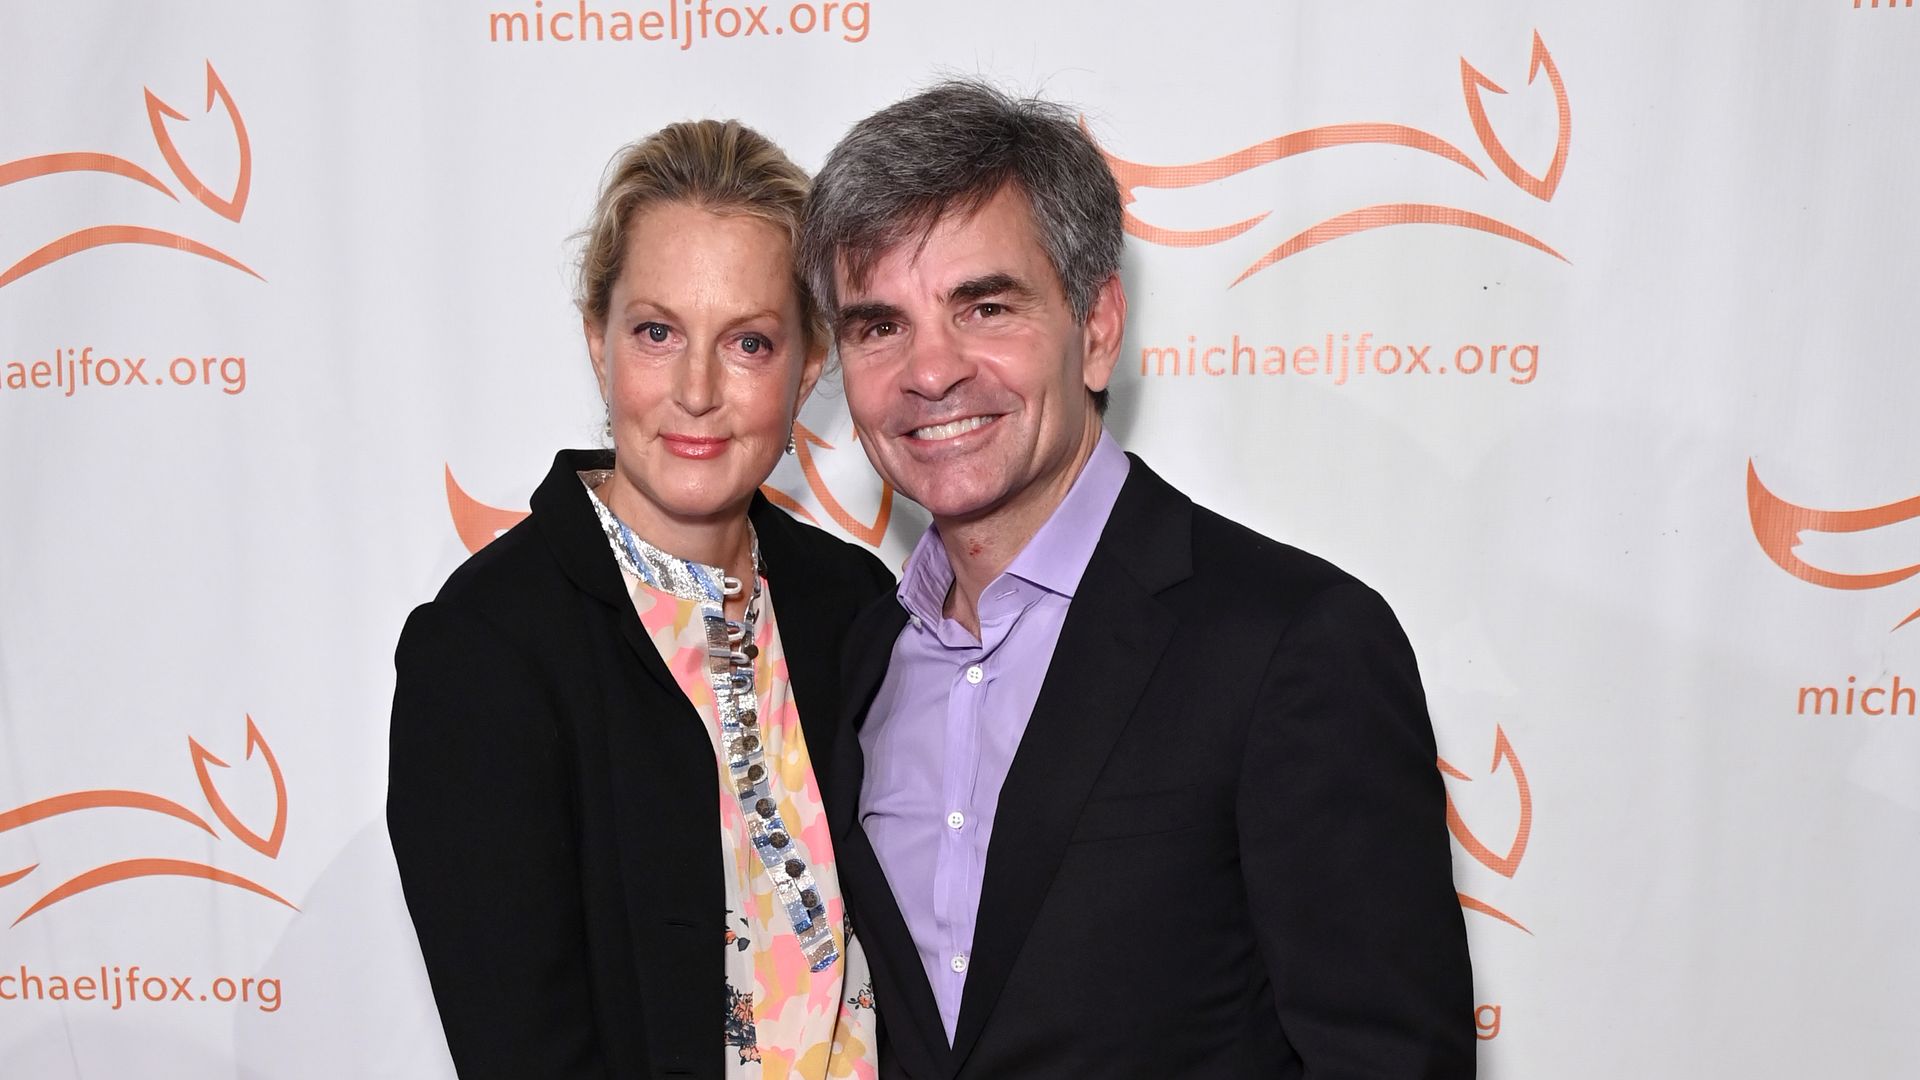 Ali Wentworth and George Stephanopoulos screening 2022